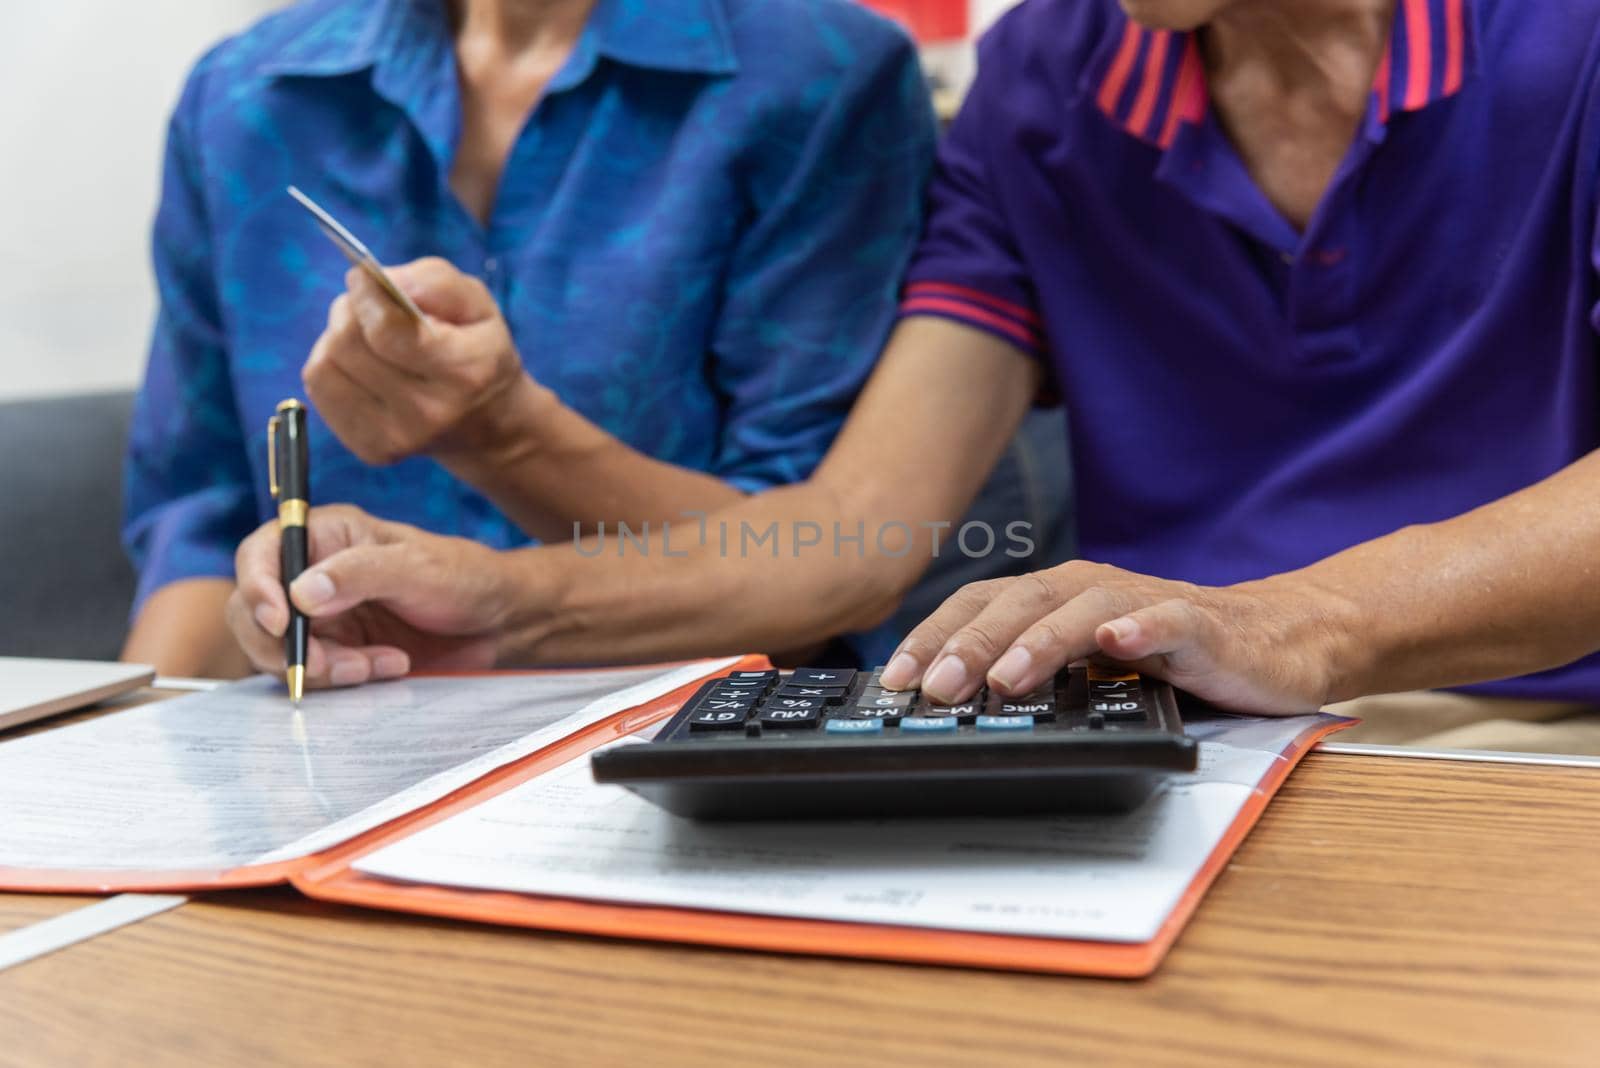 Asian elderly holding pen contract payment credit card insurance health care paperwork or document report shopping finance concept. by aoo3771